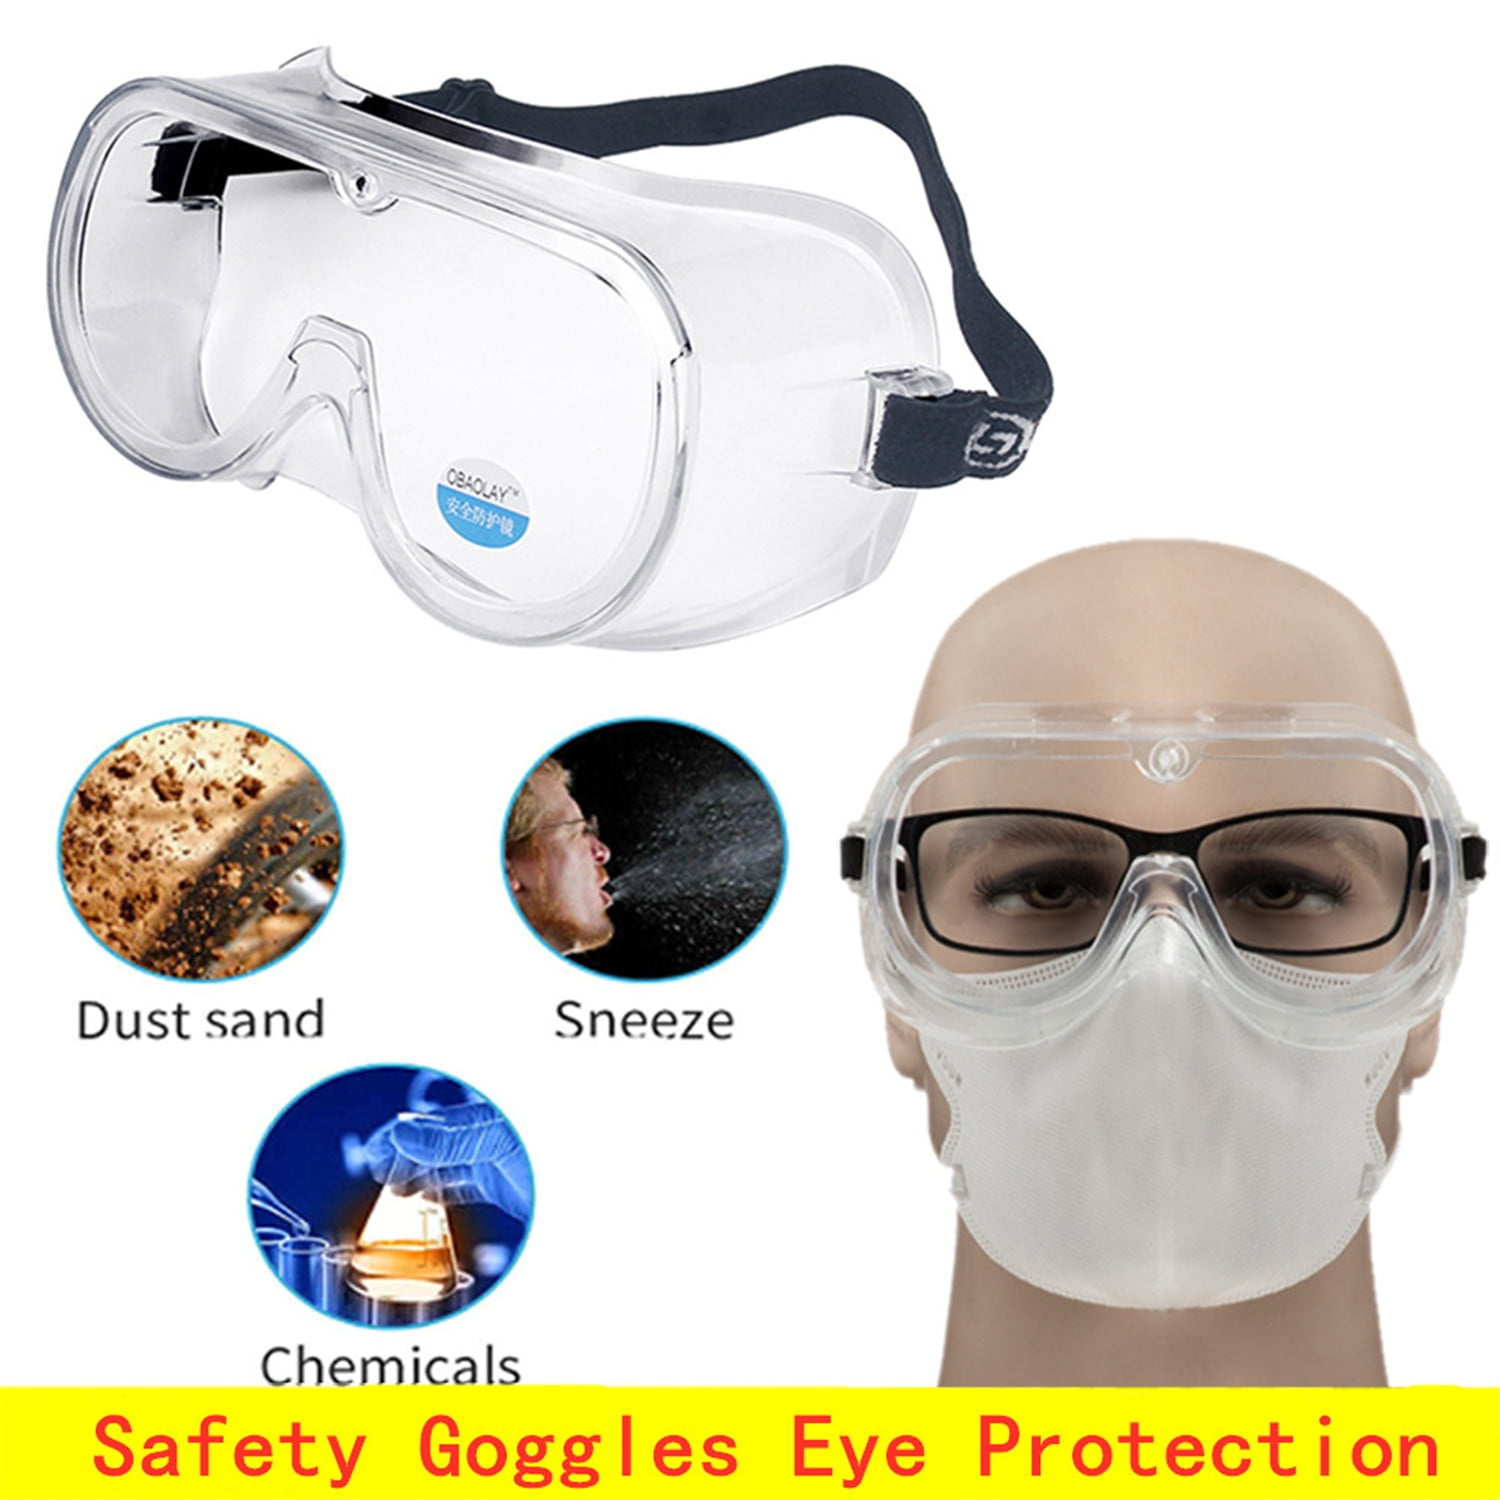 Anti-fog Anti-droplets Dust Proof Eye Protection Glasses & Protective Goggles Childs Lab Work Adjustable Elastic Band for Adult Safety Protective Goggles Perfect for Construction